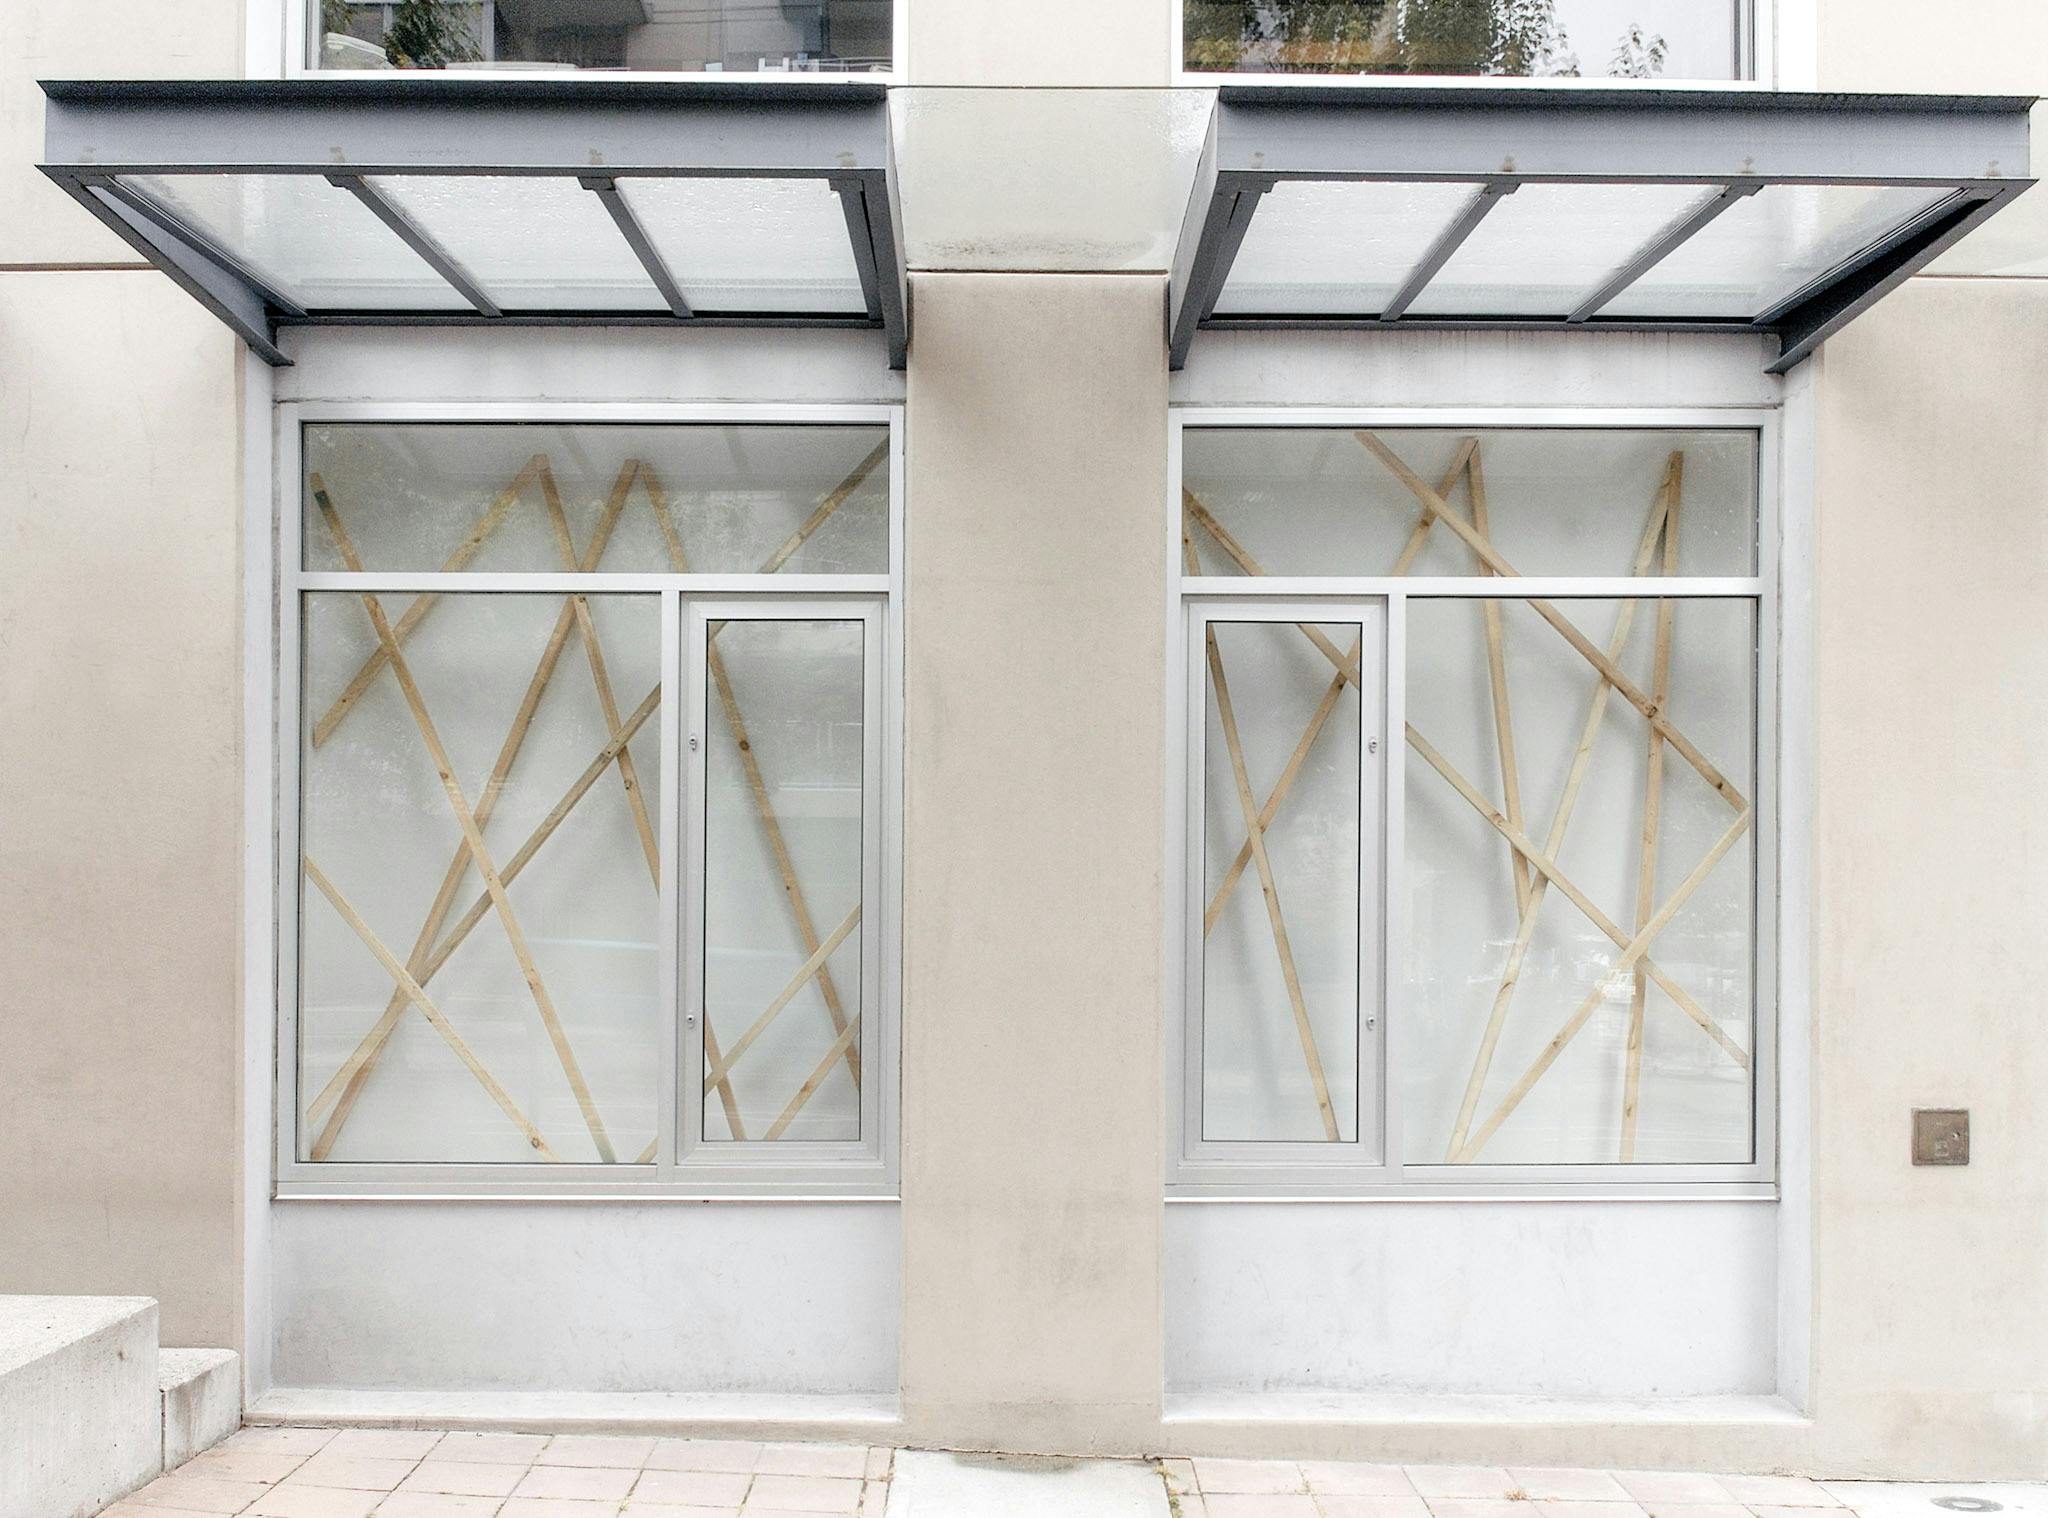 This image shows two of CAG’s window spaces, in which Elspeth Pratt’s installation art is displayed. Thin wooden bars are diagonally placed. These bars do not parallel to each other. 